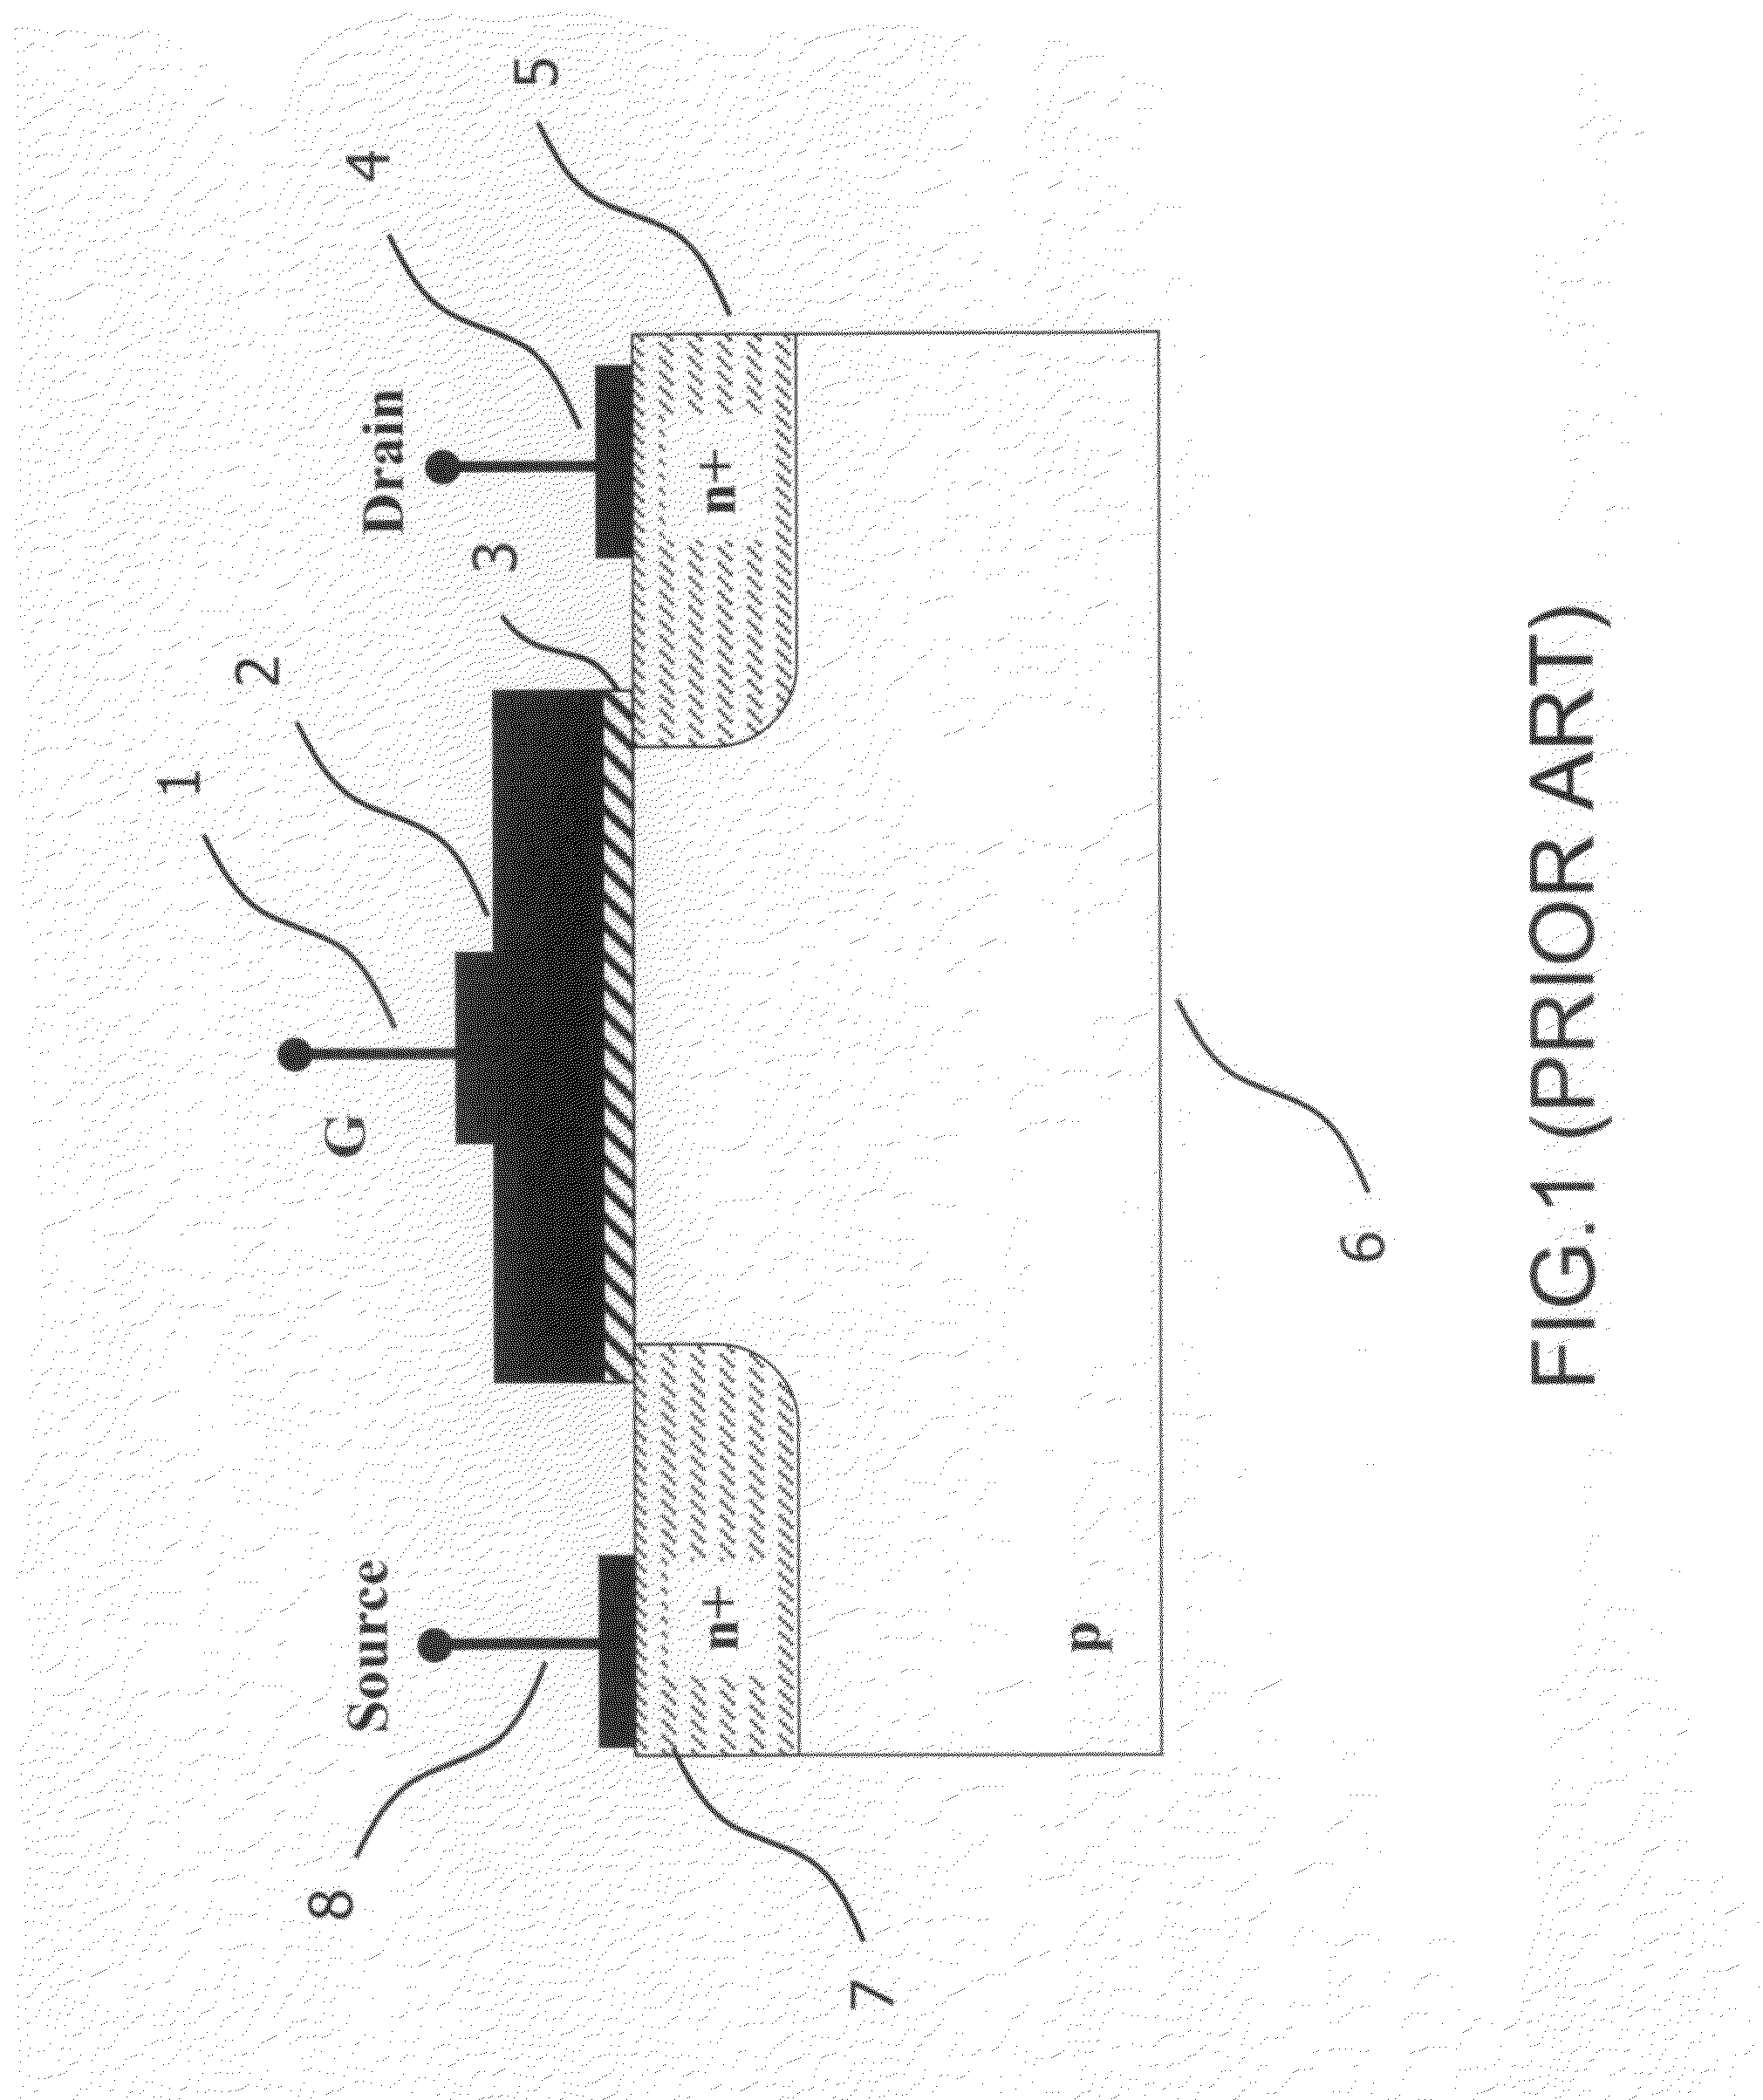 Single structure cascode device